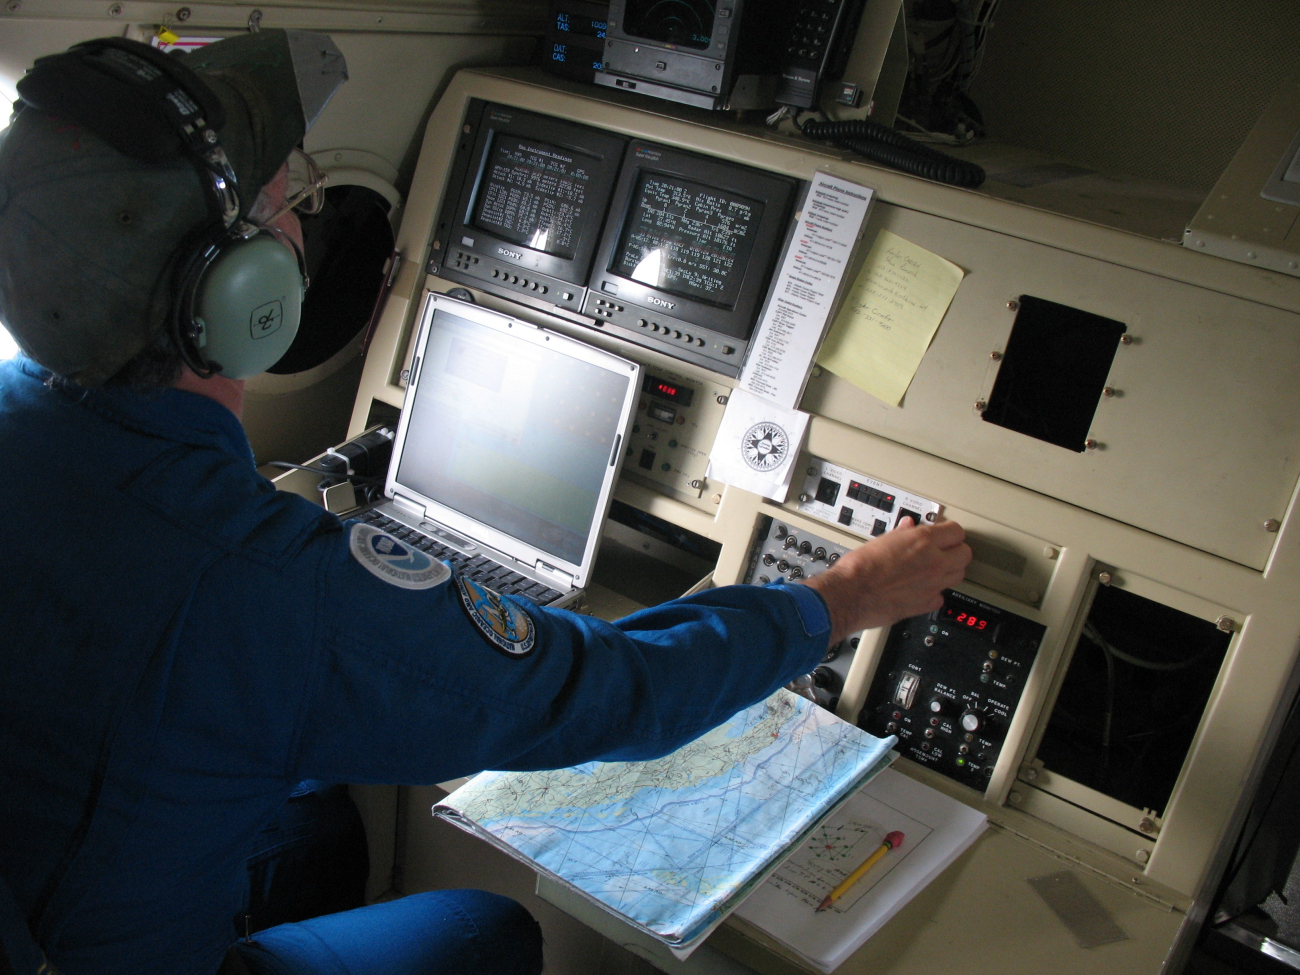 Scientist monitoring computers and instruments during flight into Hurricane Ike